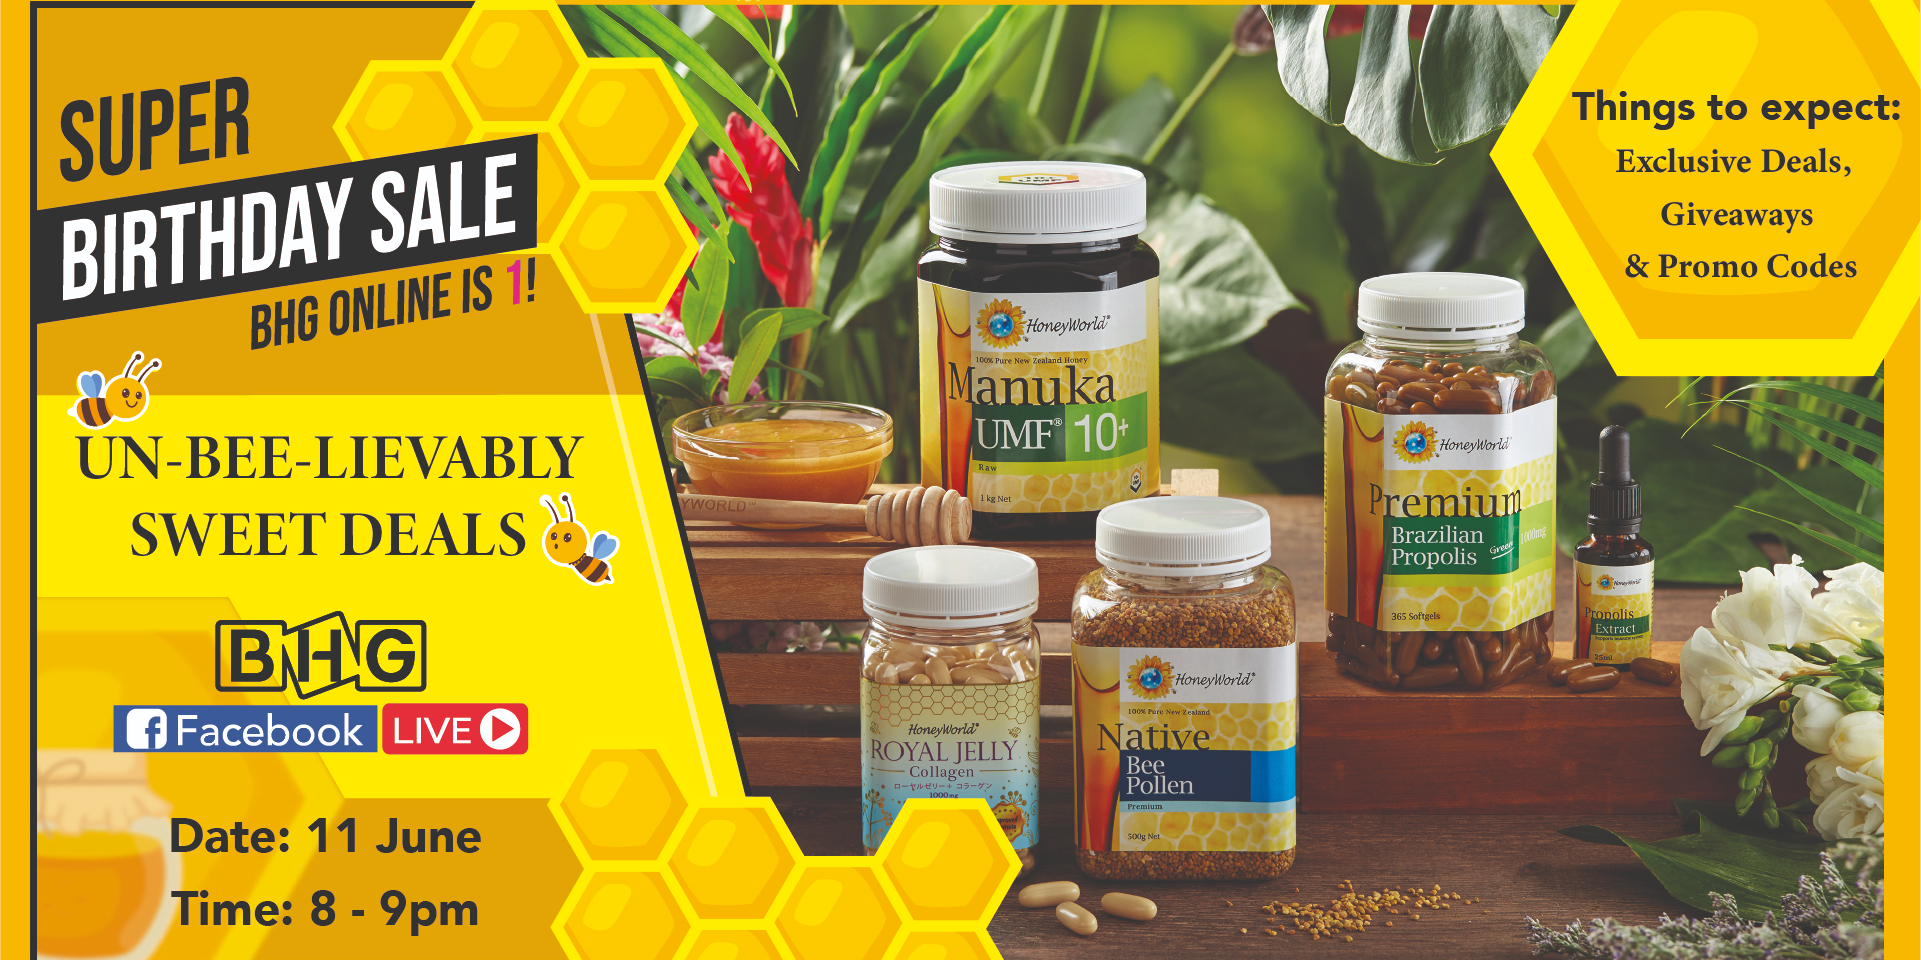 Un-BEE-lievably Sweet Deals, Giveaways, Promo Codes & More – BHG x HoneyWorld Live Stream